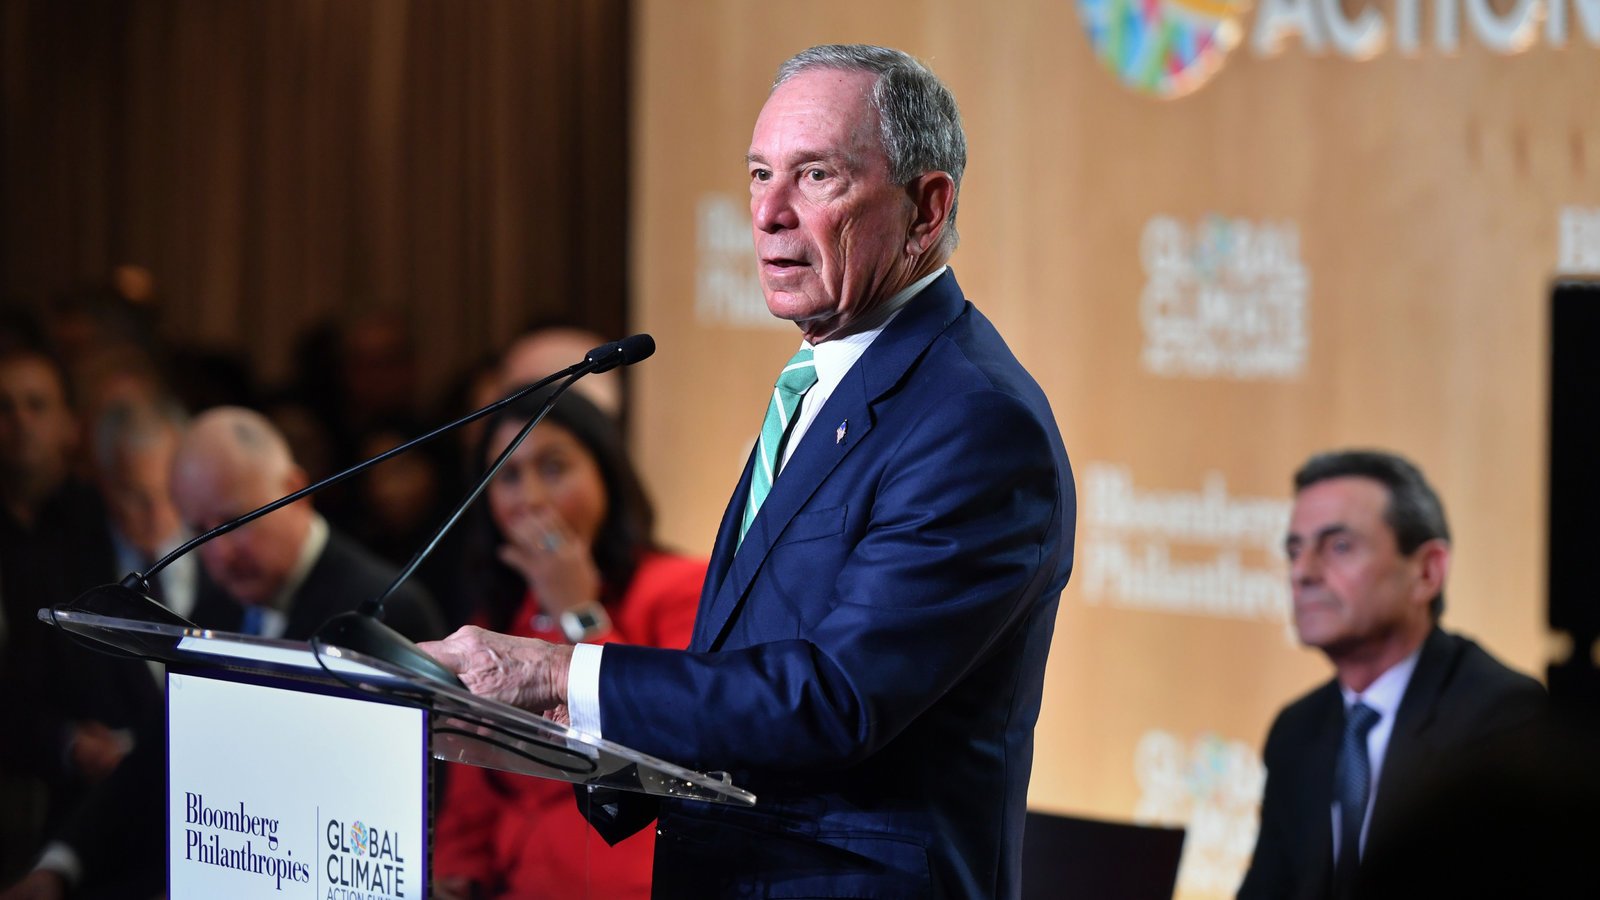 After Hints of a Presidential Run, Bloomberg Switches to ...